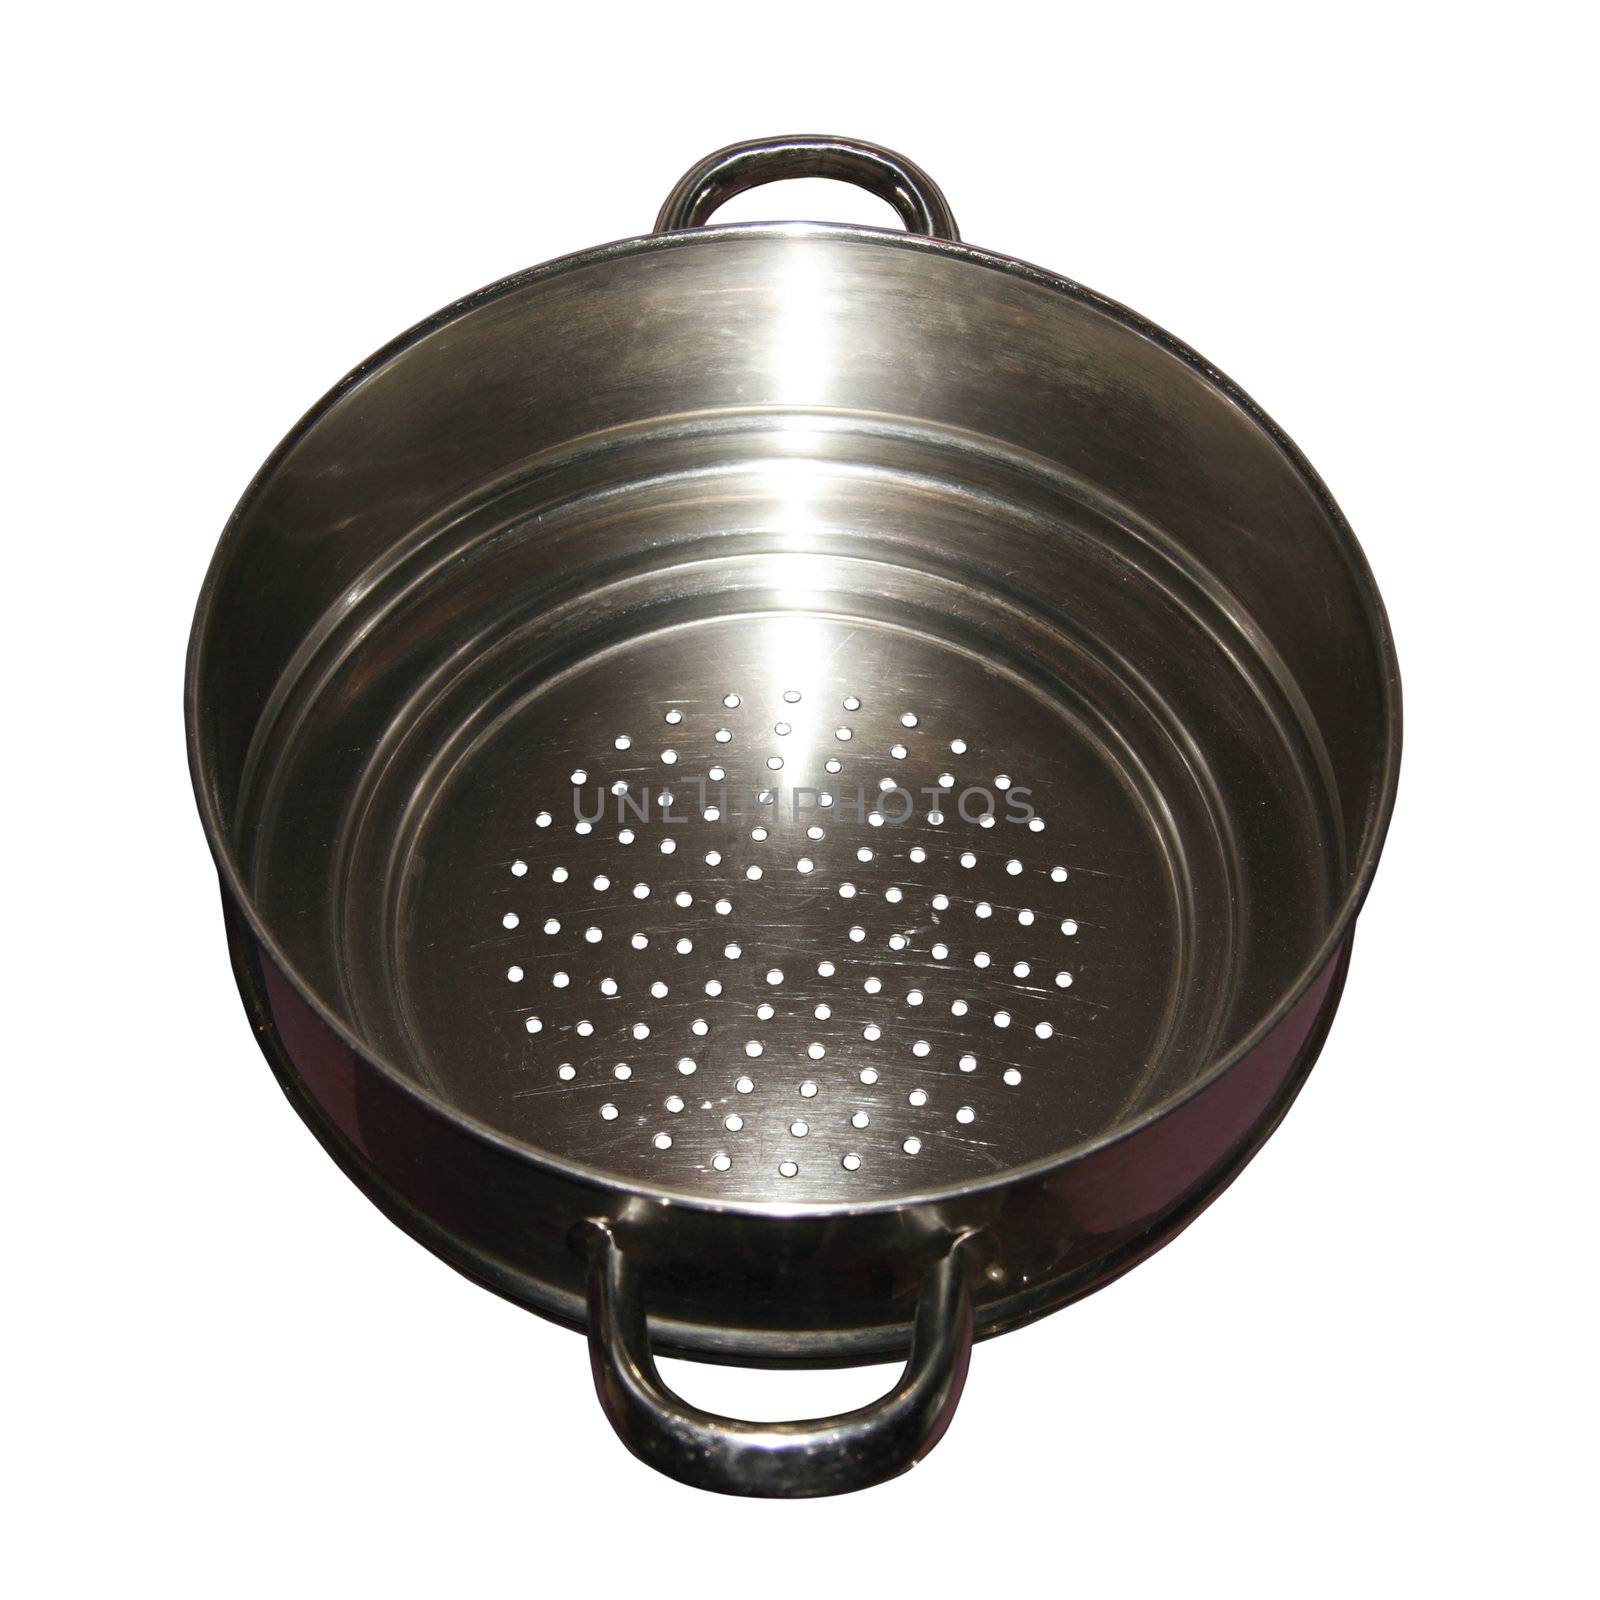 cut out of a kitchen colander